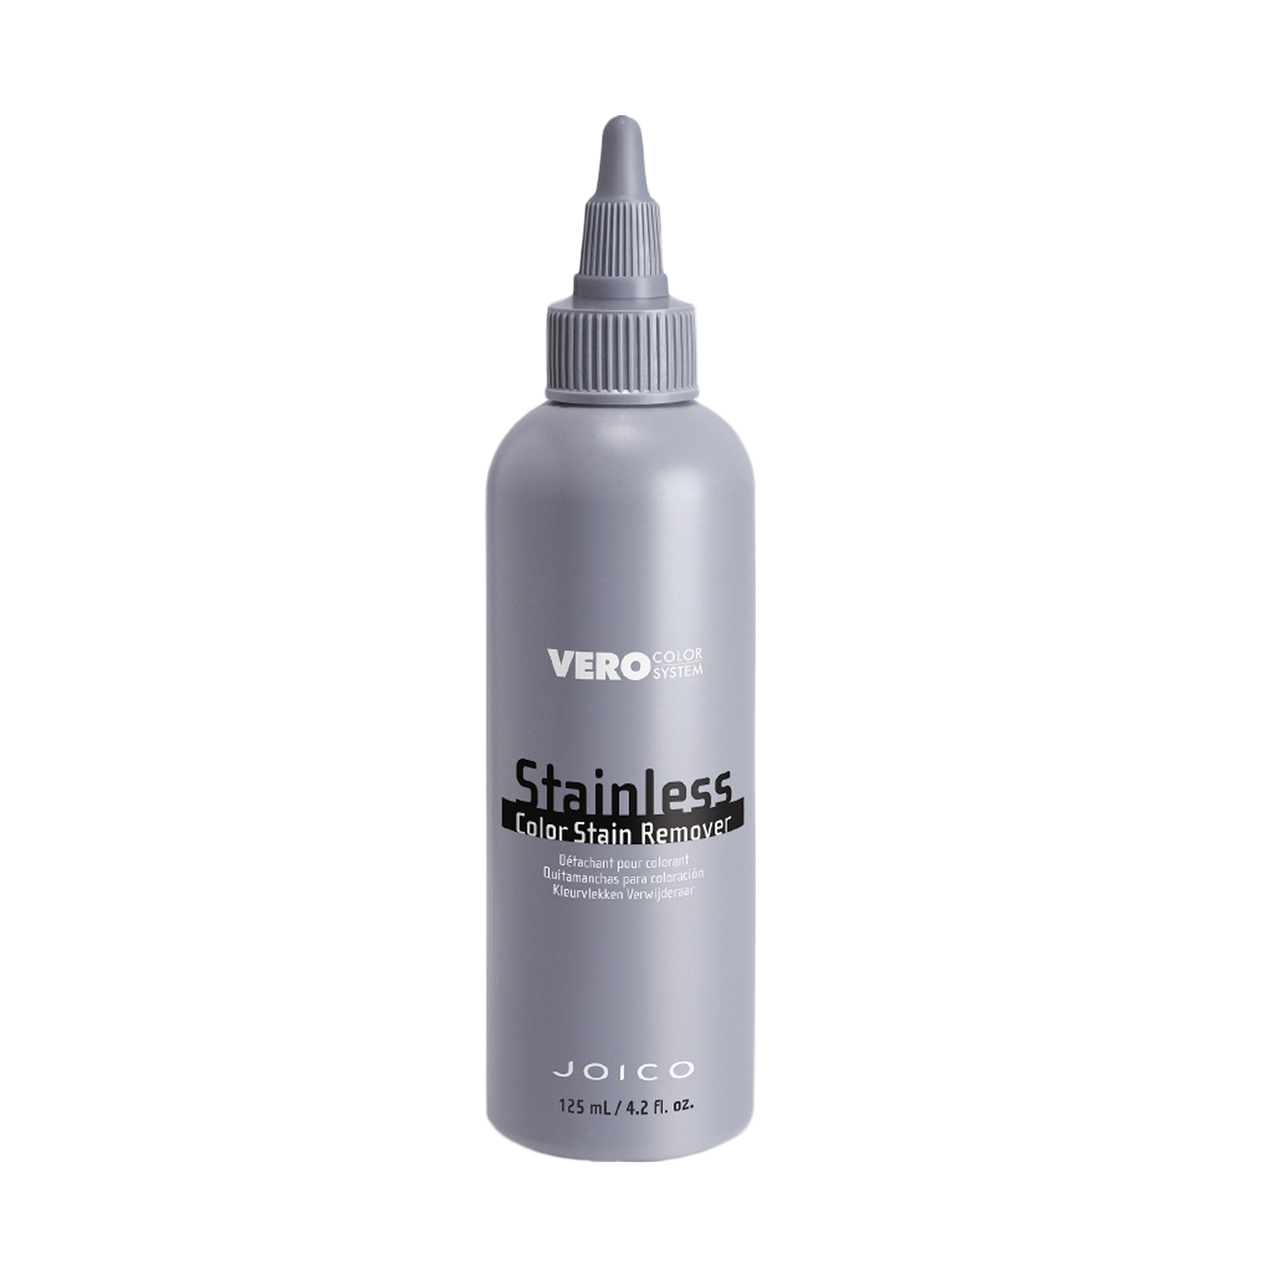 Joico Vero" Stainless" Haircolor Stain Remover 4.2 fl. oz.